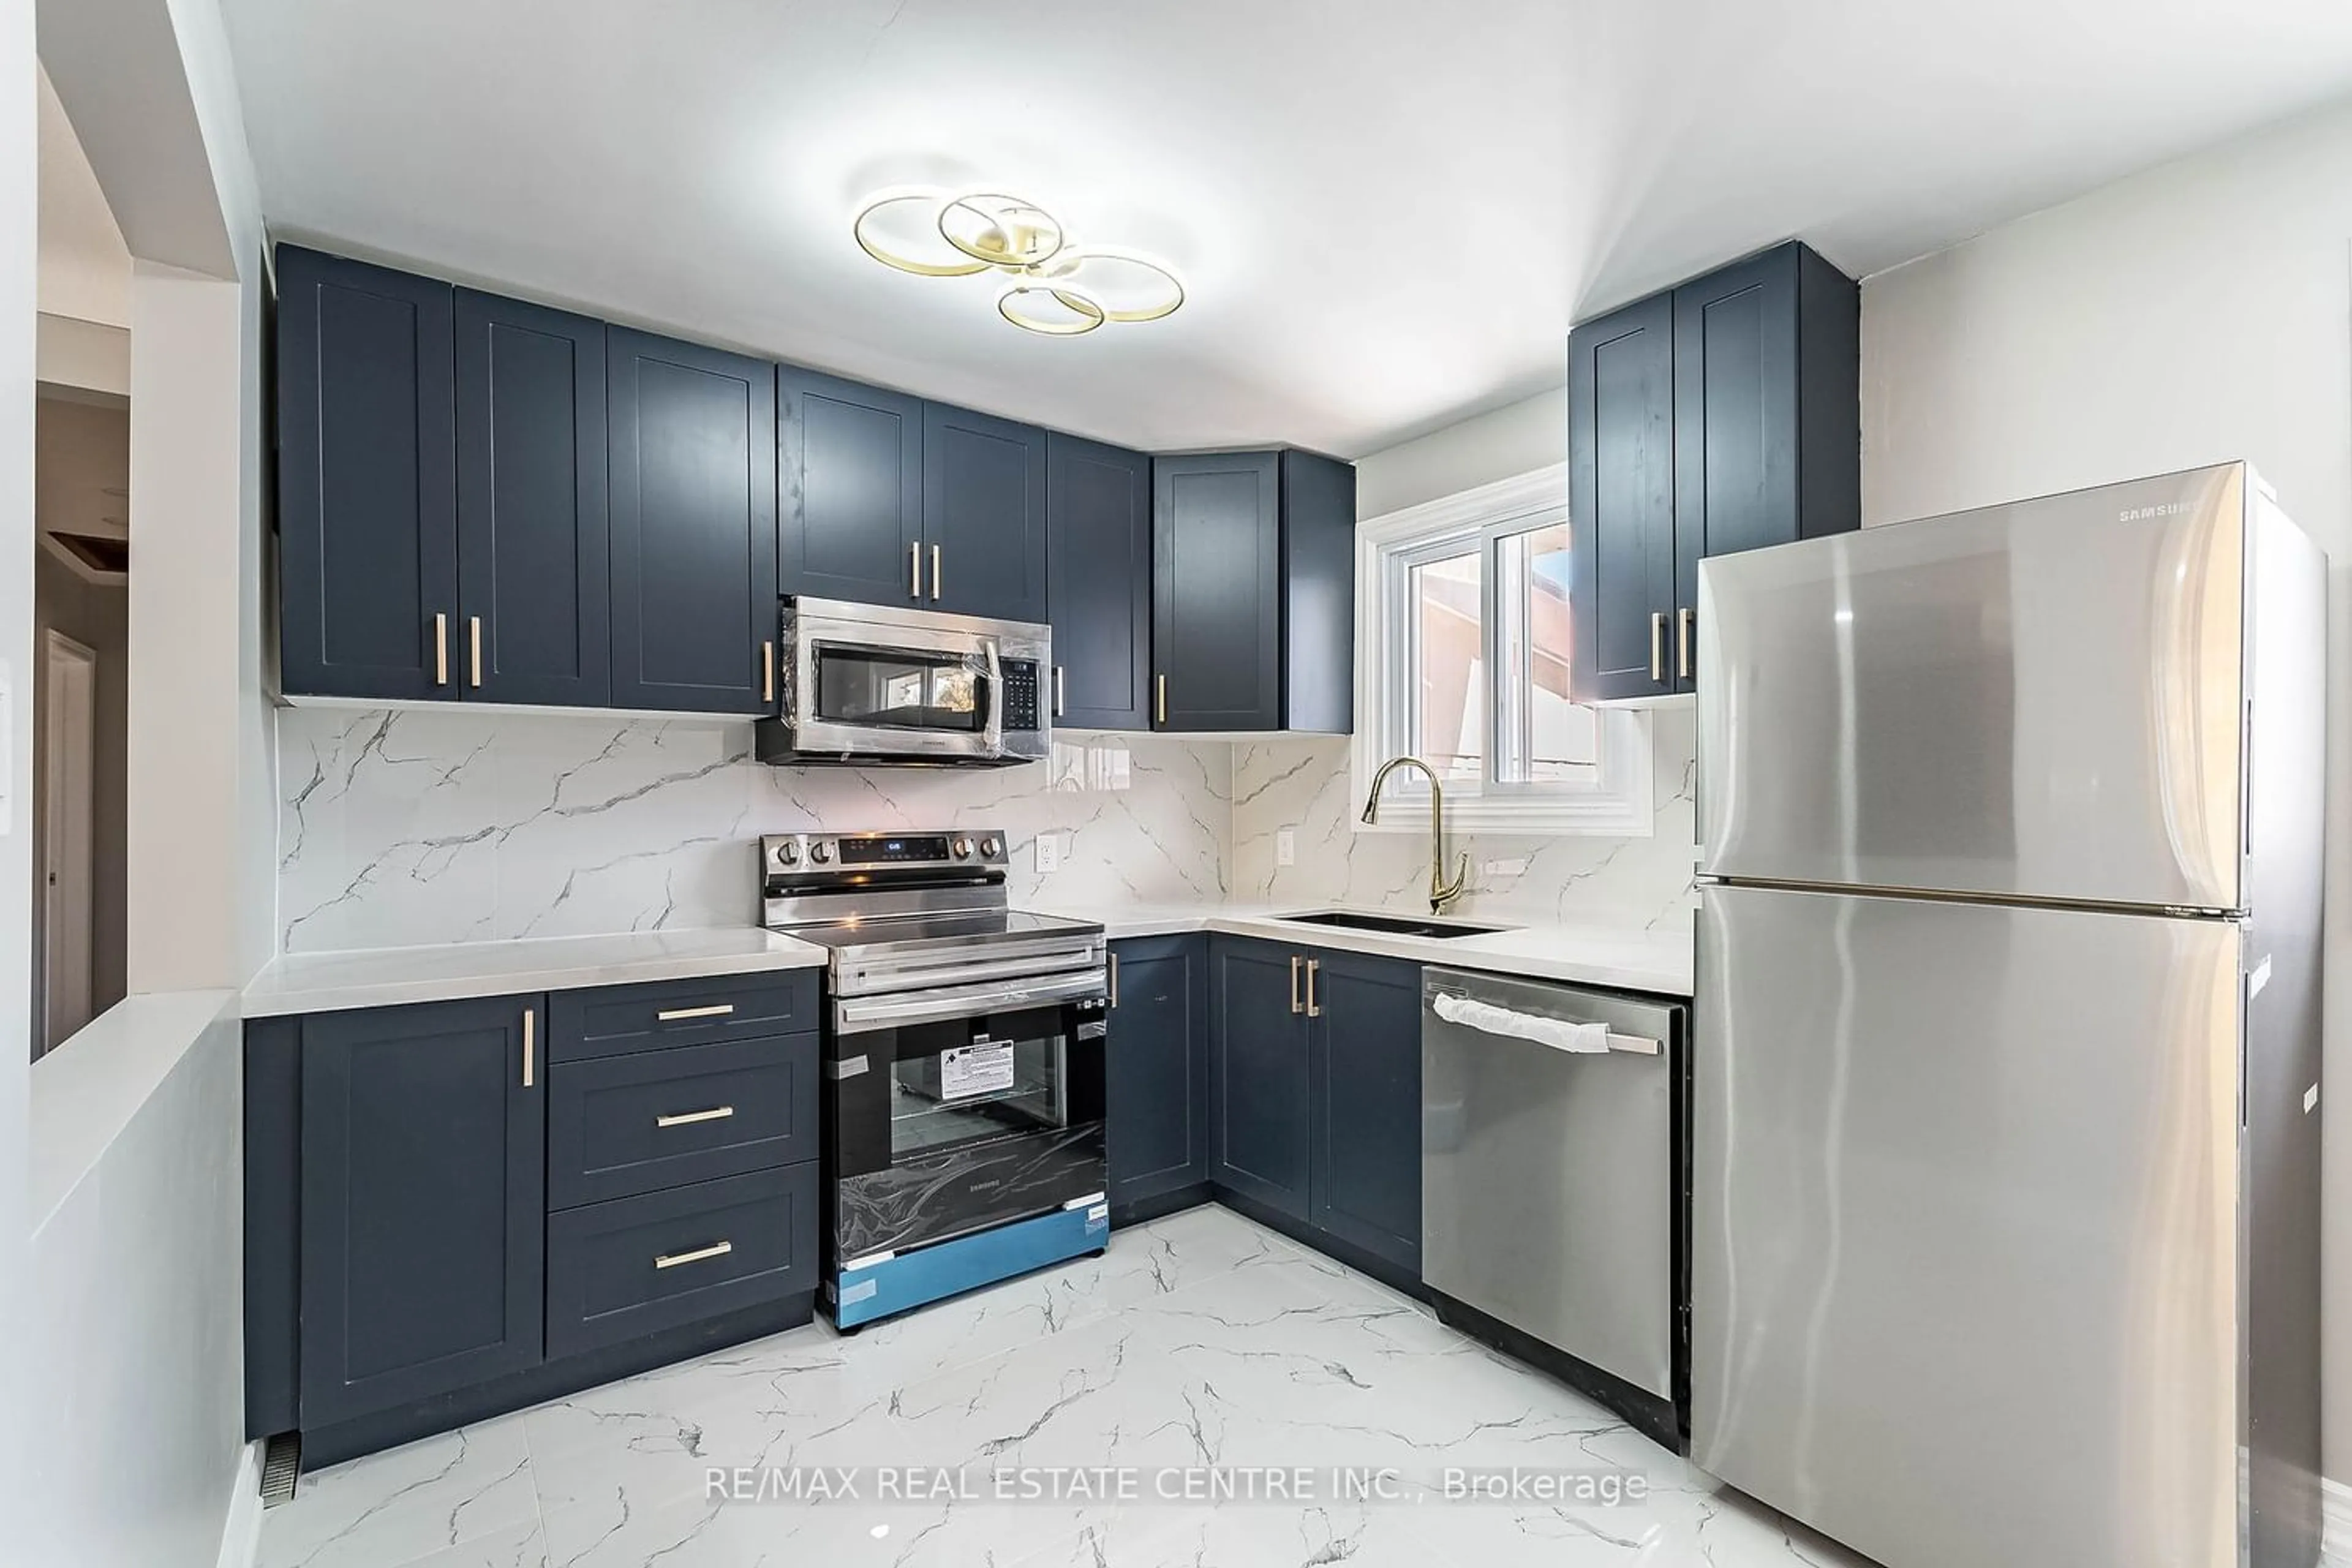 Standard kitchen for 496 Bunting Rd, St. Catharines Ontario L2M 3A8